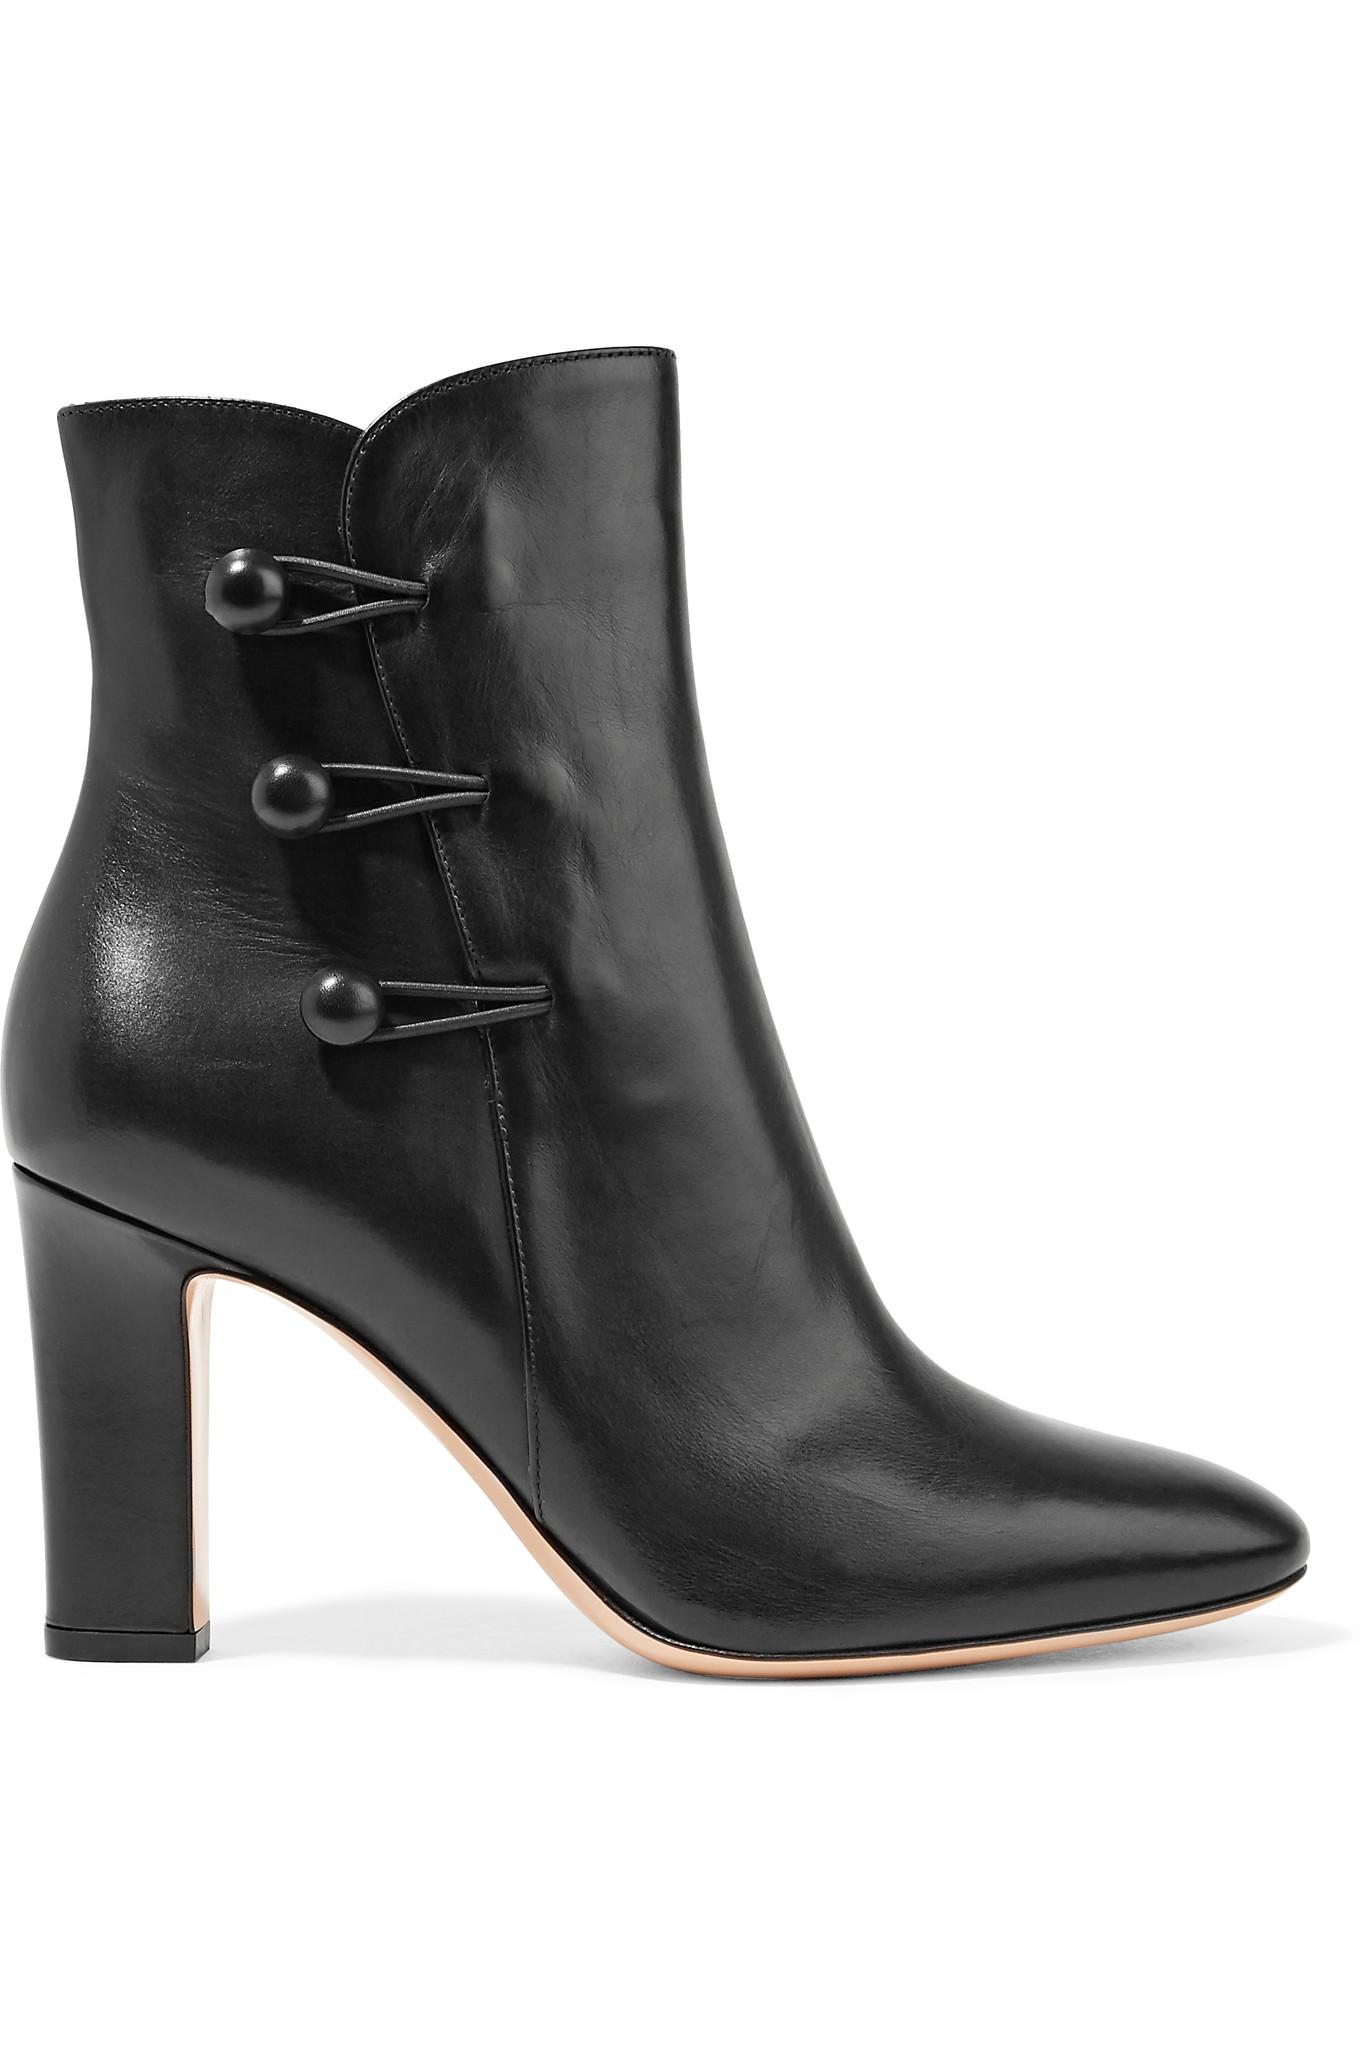 Gianvito Rossi Leather Ankle Boots in Black - Lyst1365 x 2048